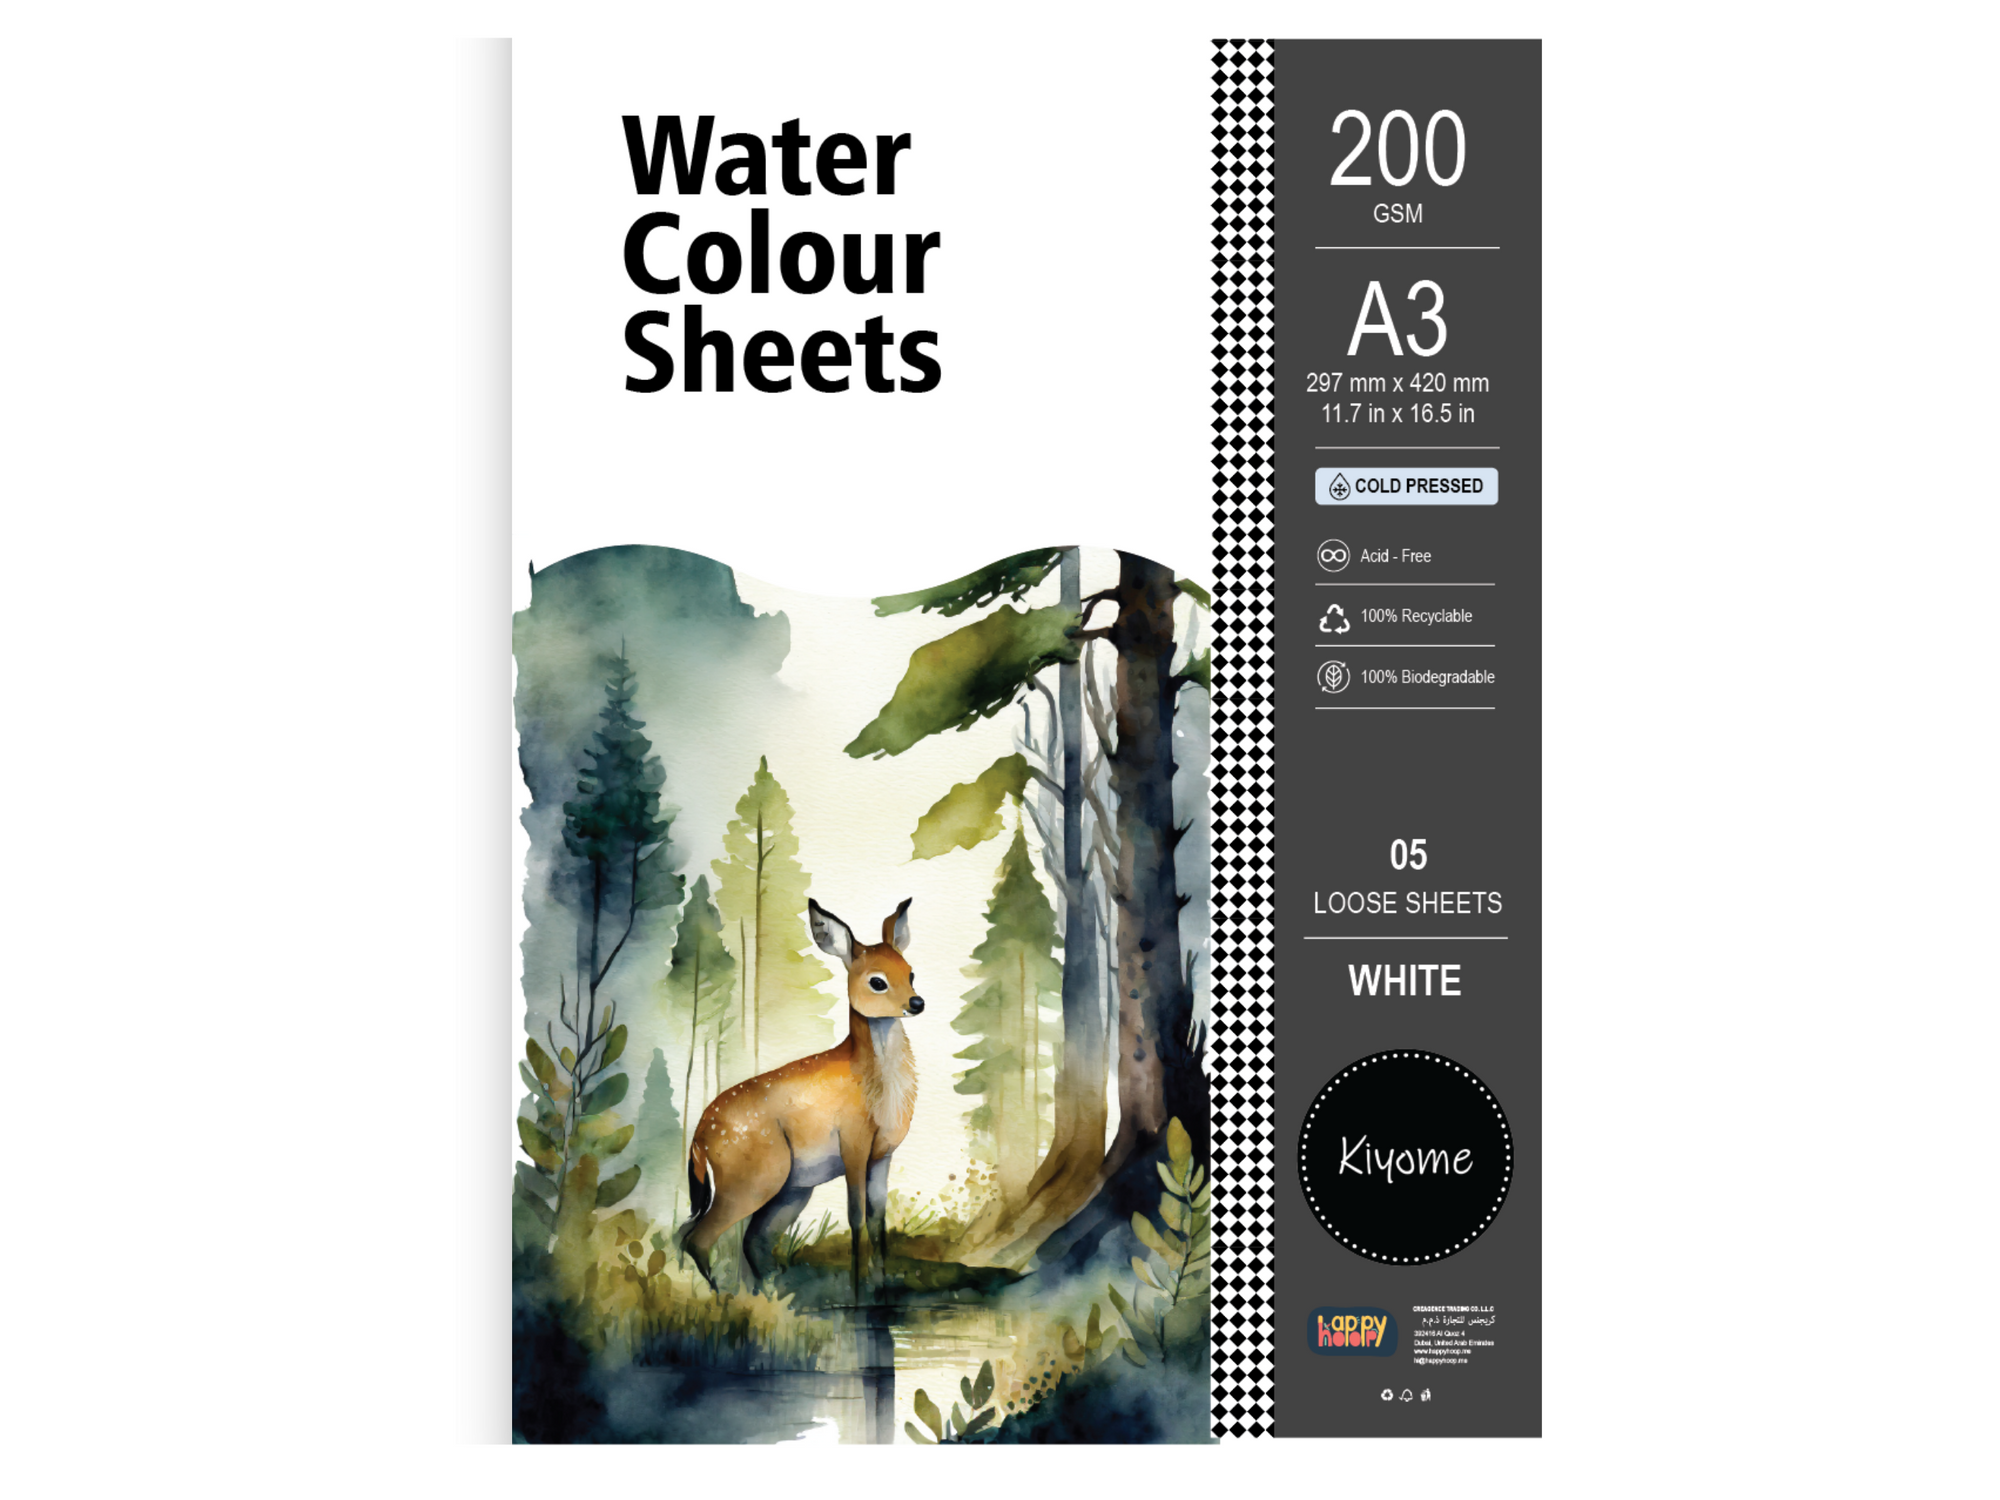 Kiyome Watercolour Sheets | 200 GSM | Cold Pressed | A4 | 10 Sheets